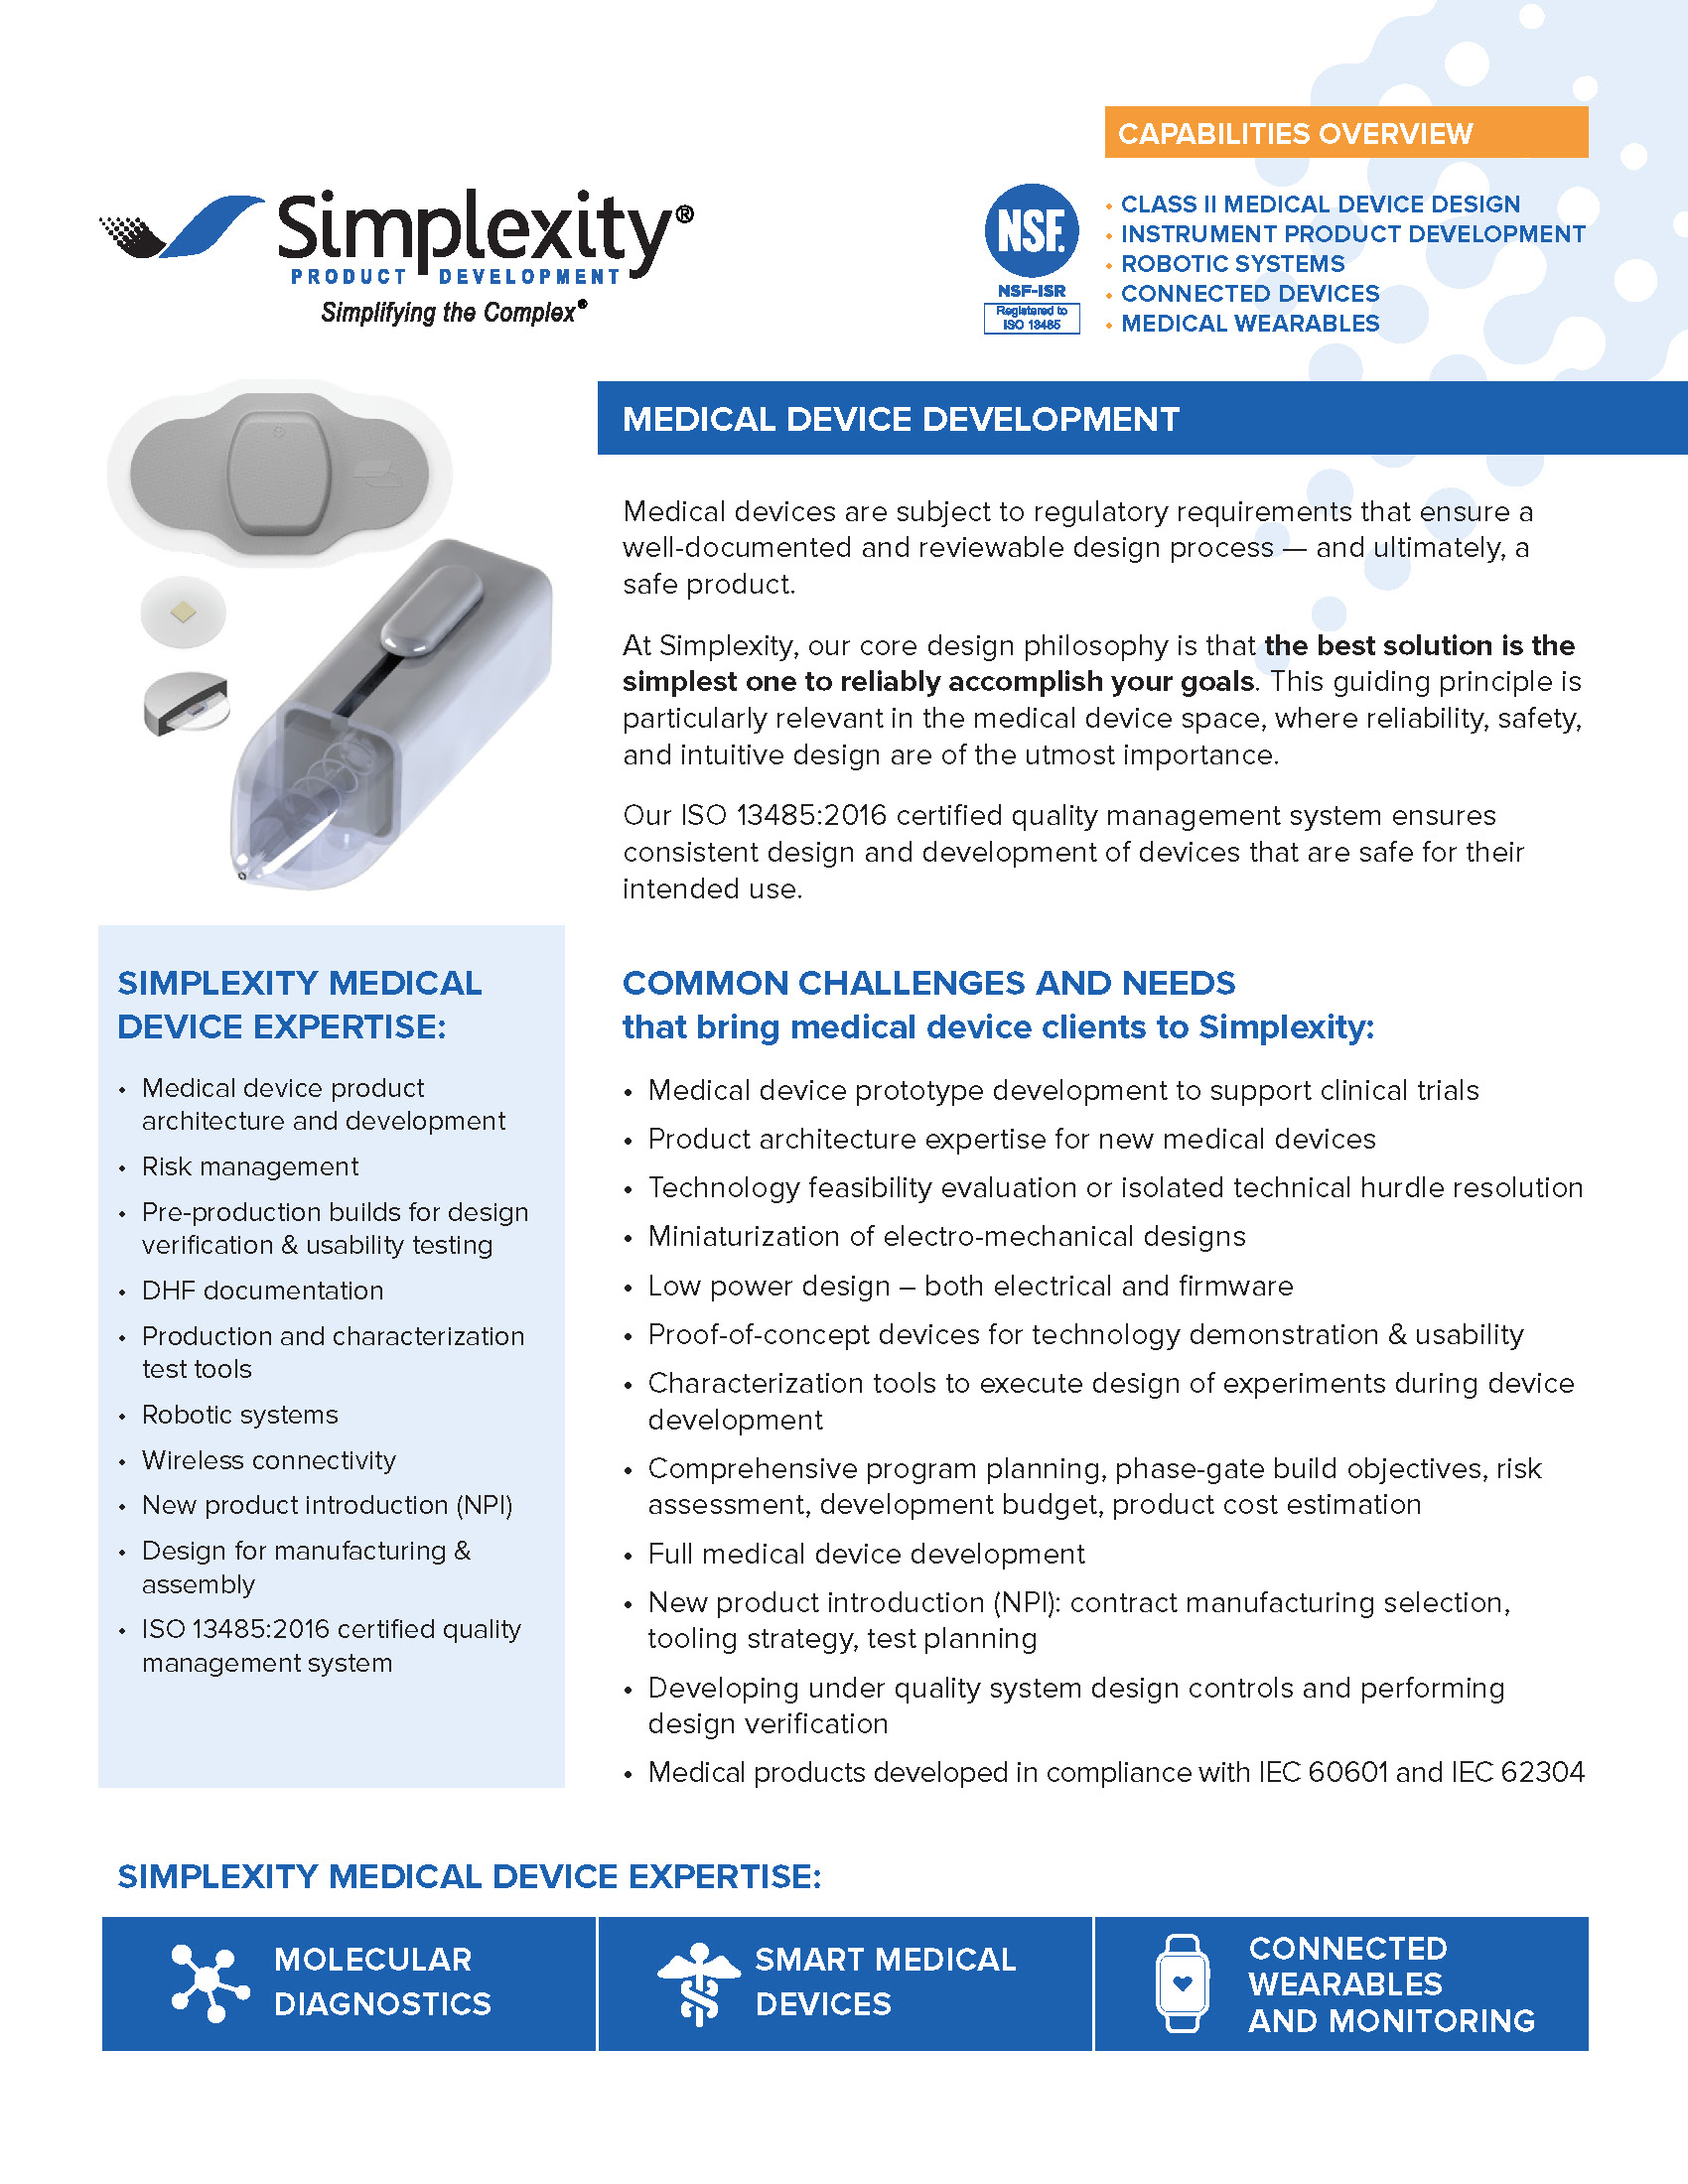 Download our Medical Device Capabilities Overview: